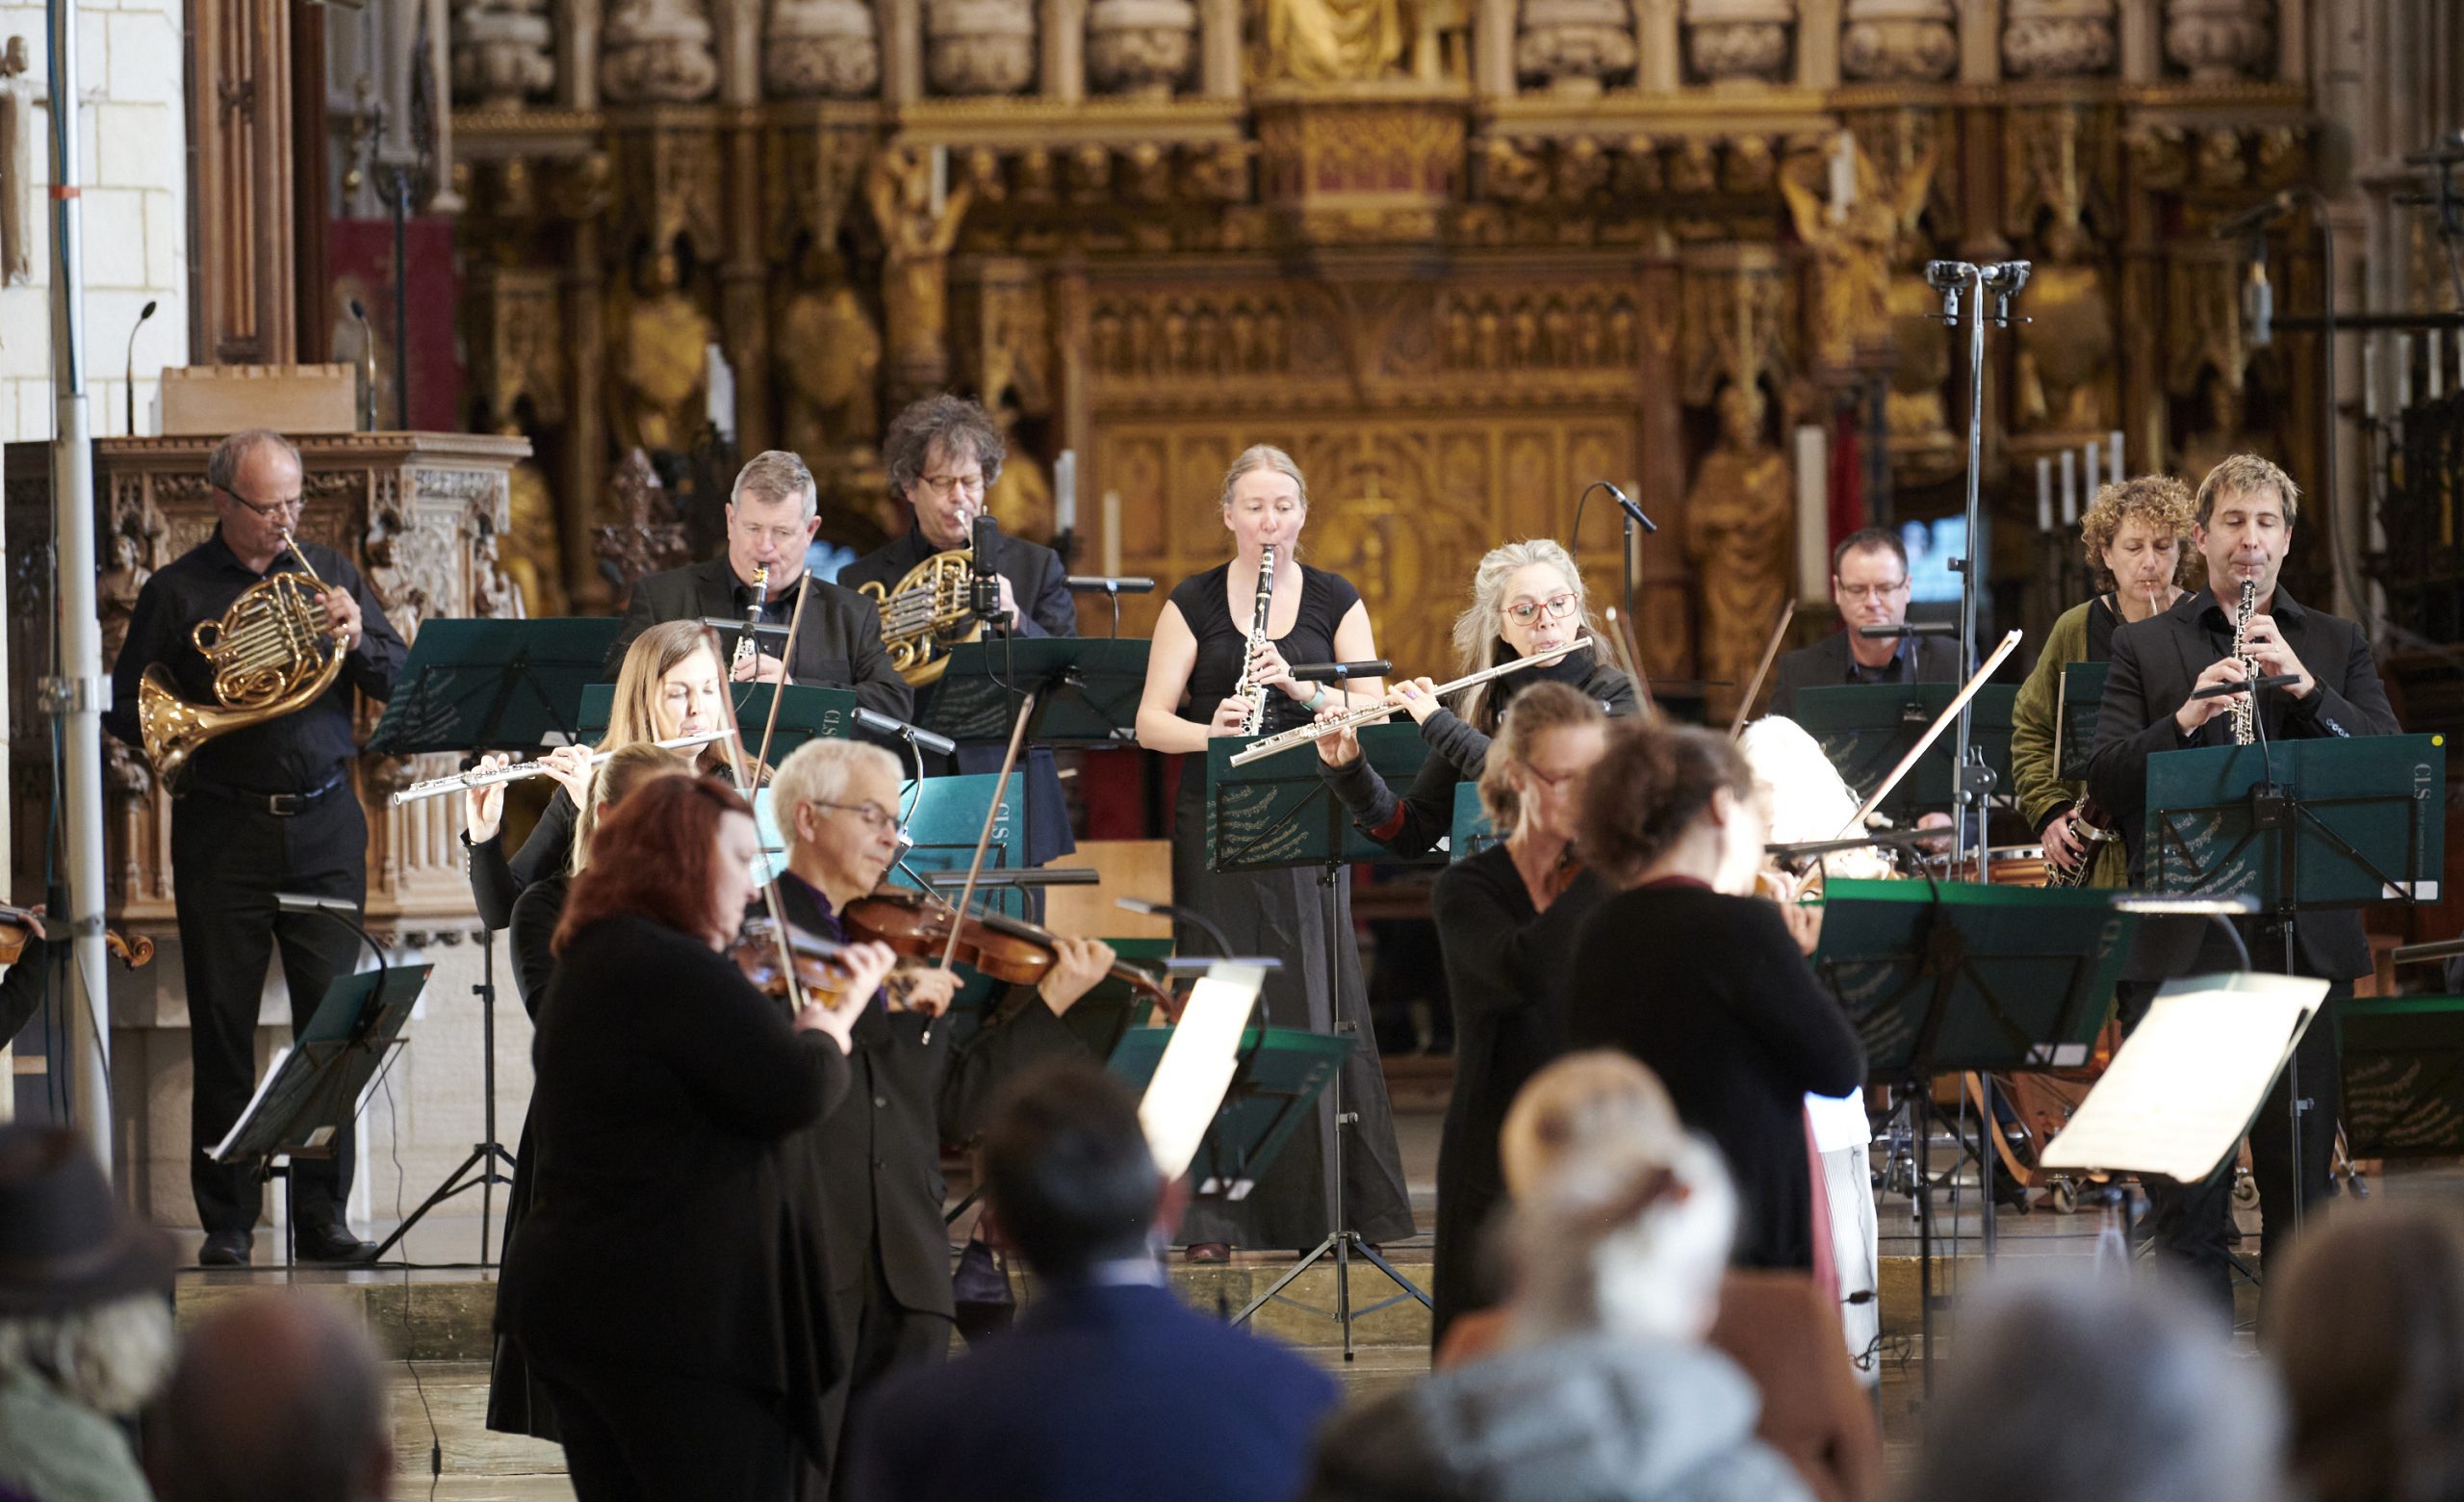 City of London Sinfonia: The Open Fund for Organisations